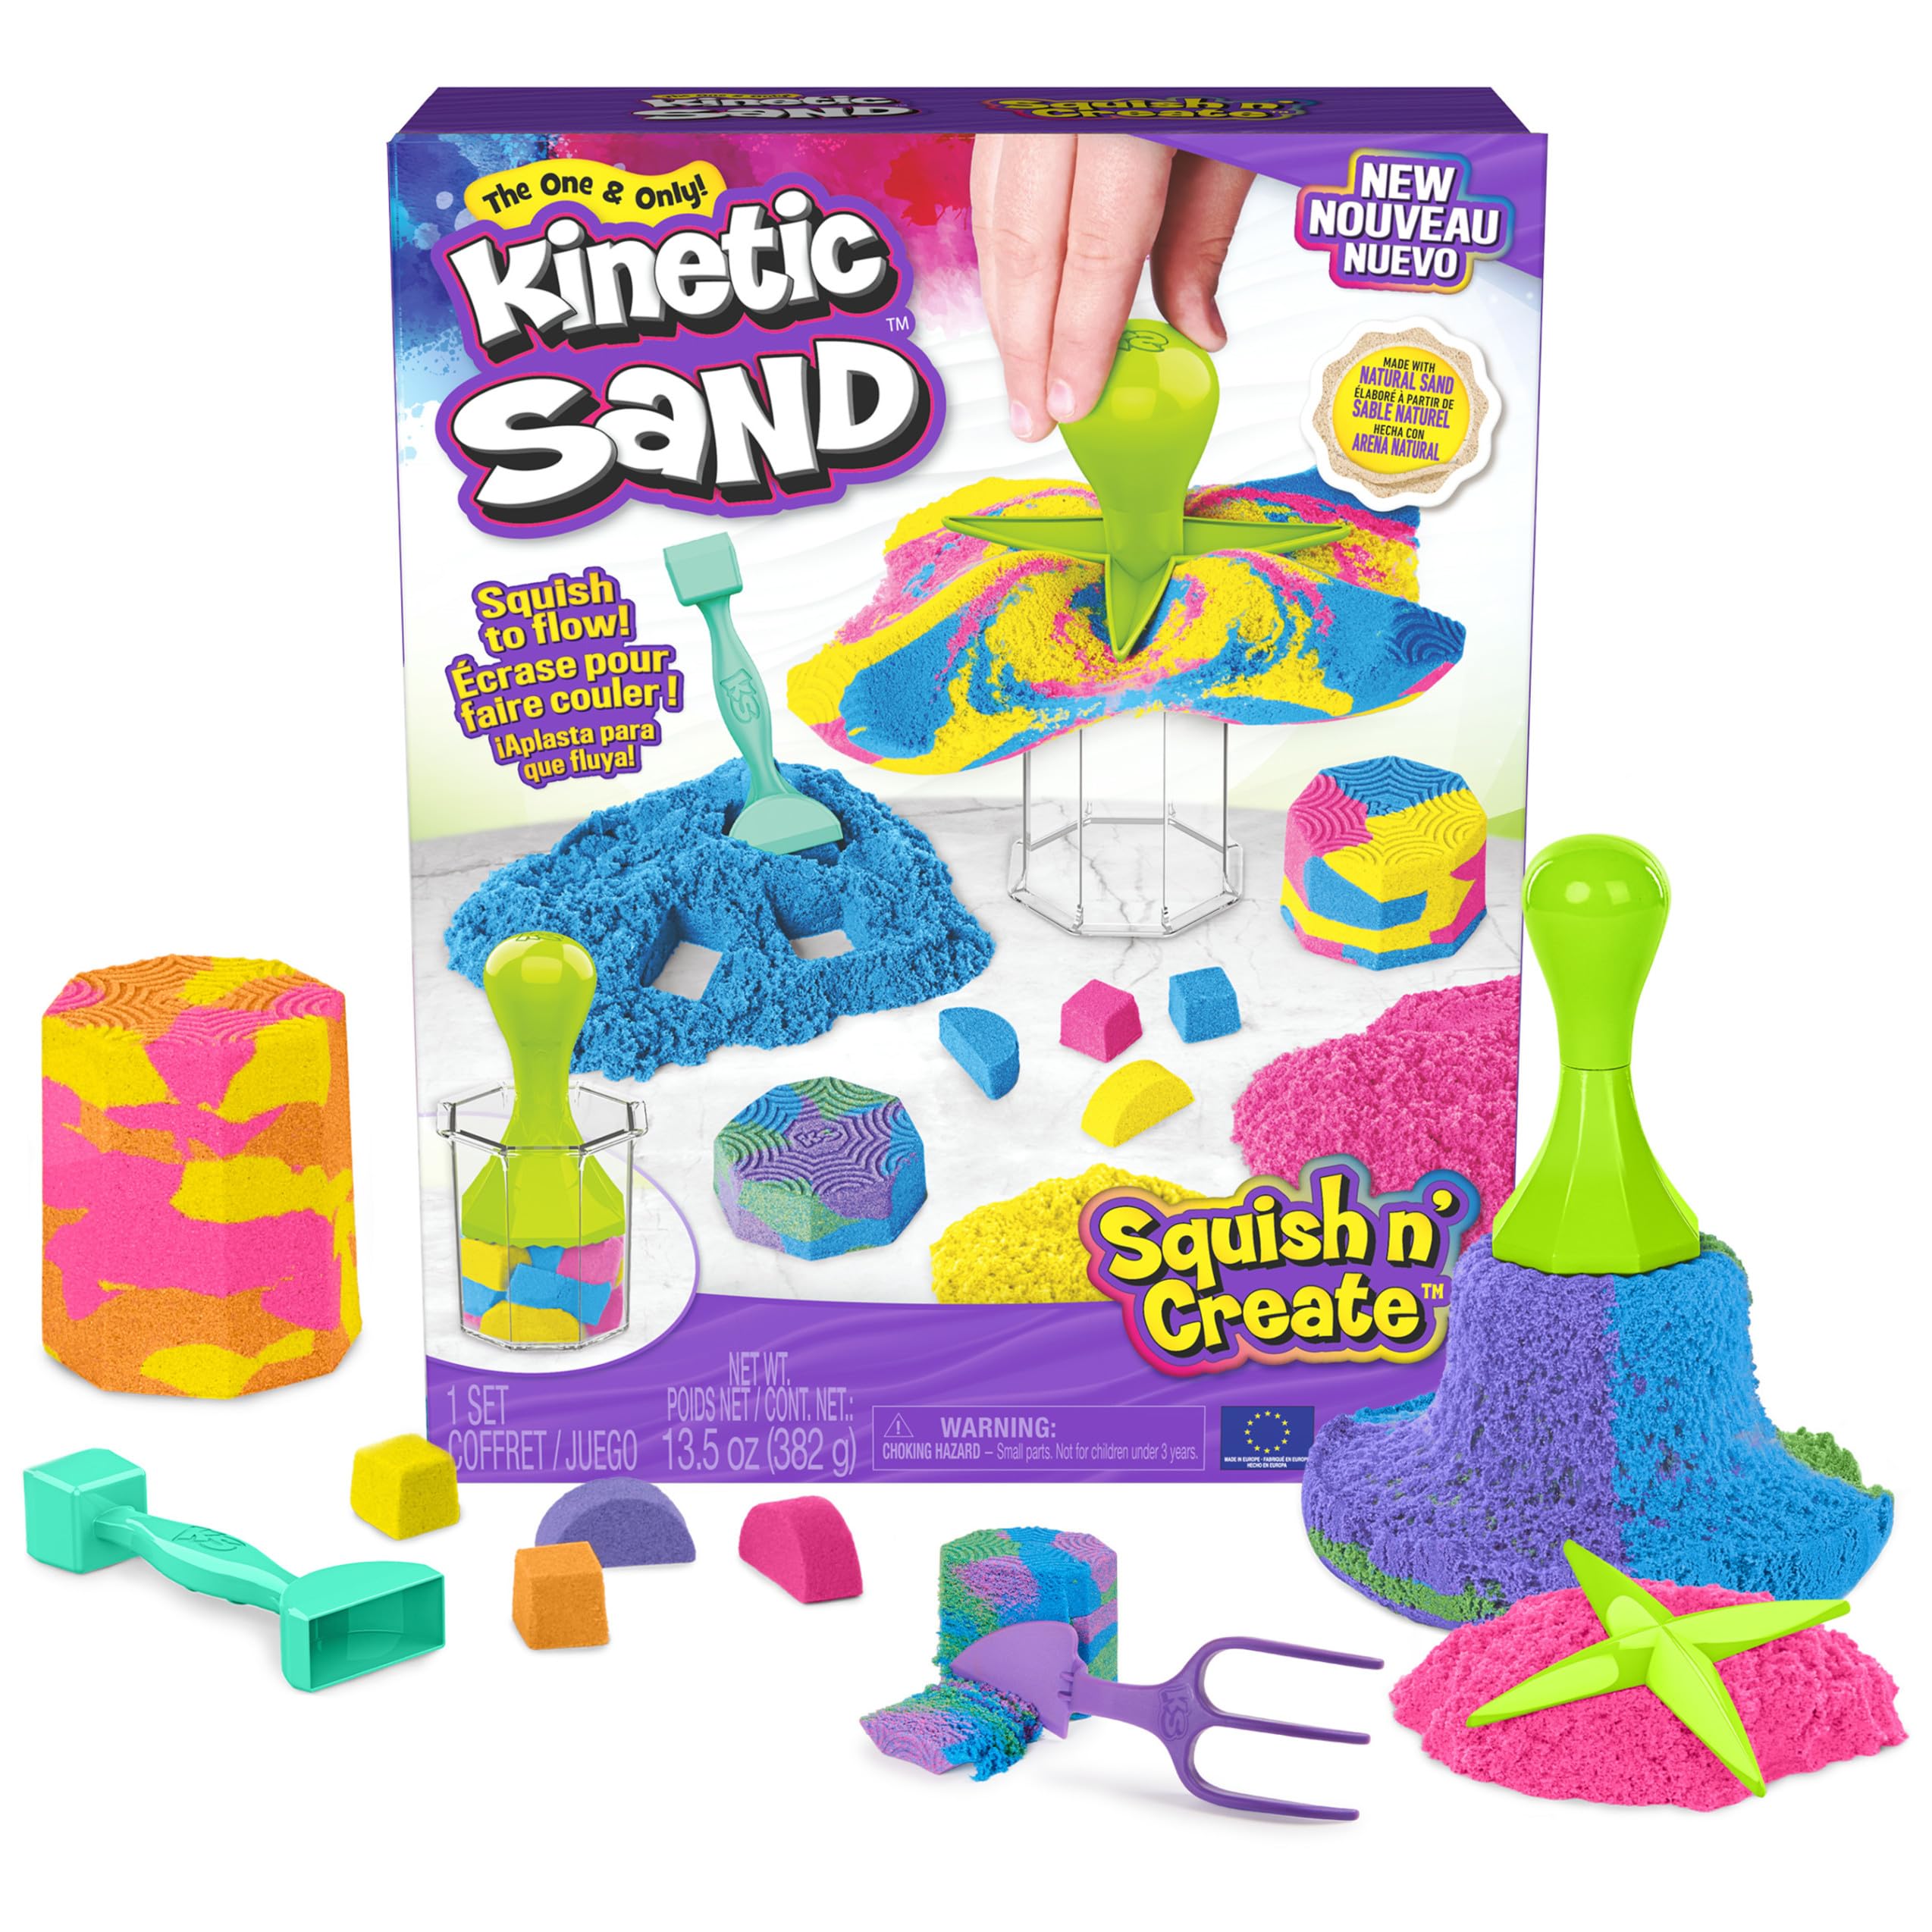 Kinetic Sand Squish N' Create Set w/ 13.5-Oz Play Sand & 5 Tools $6.53 + Free Shipping w/ Prime or on $35+